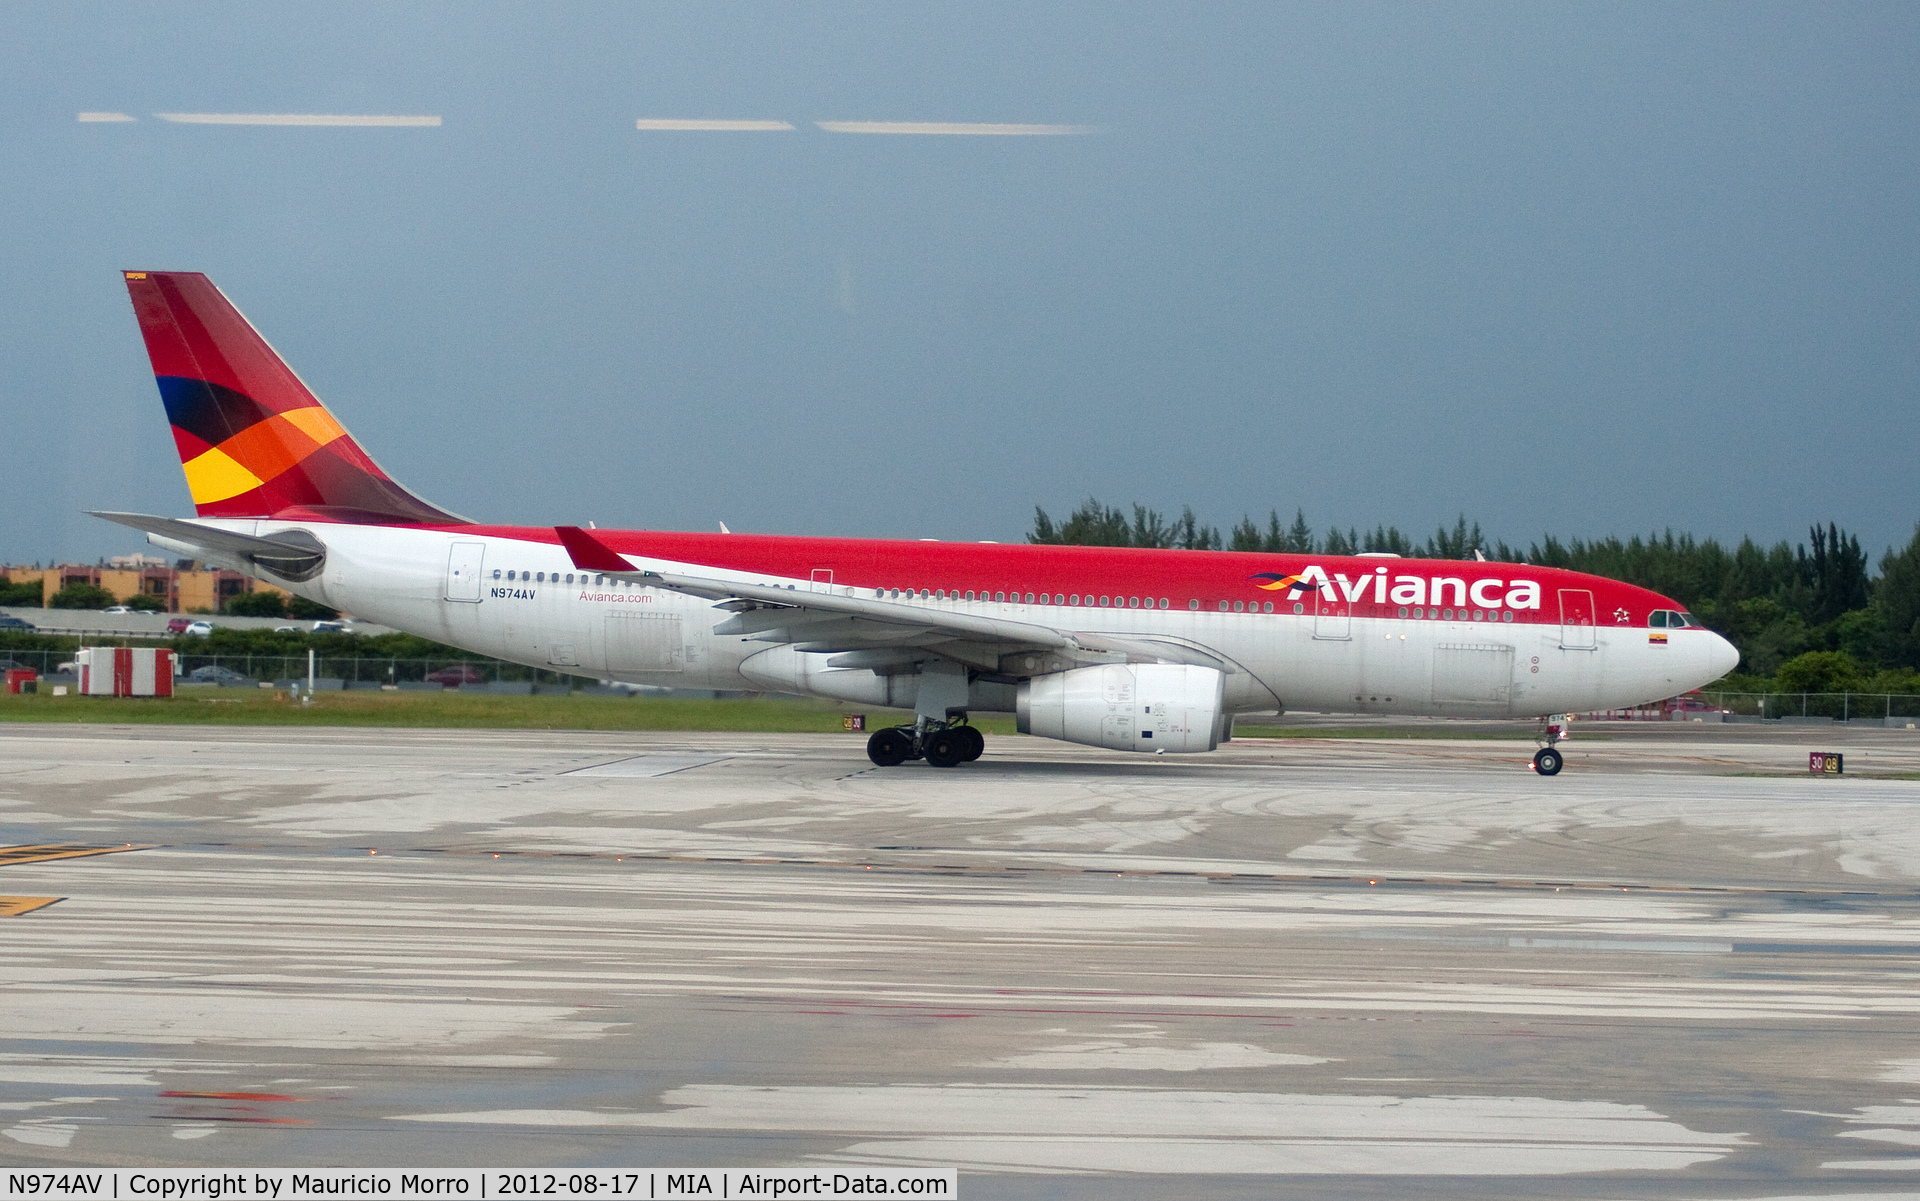 N974AV, 2011 Airbus A330-243 C/N 1208, Avianca A330 taxiing for take off at MIA